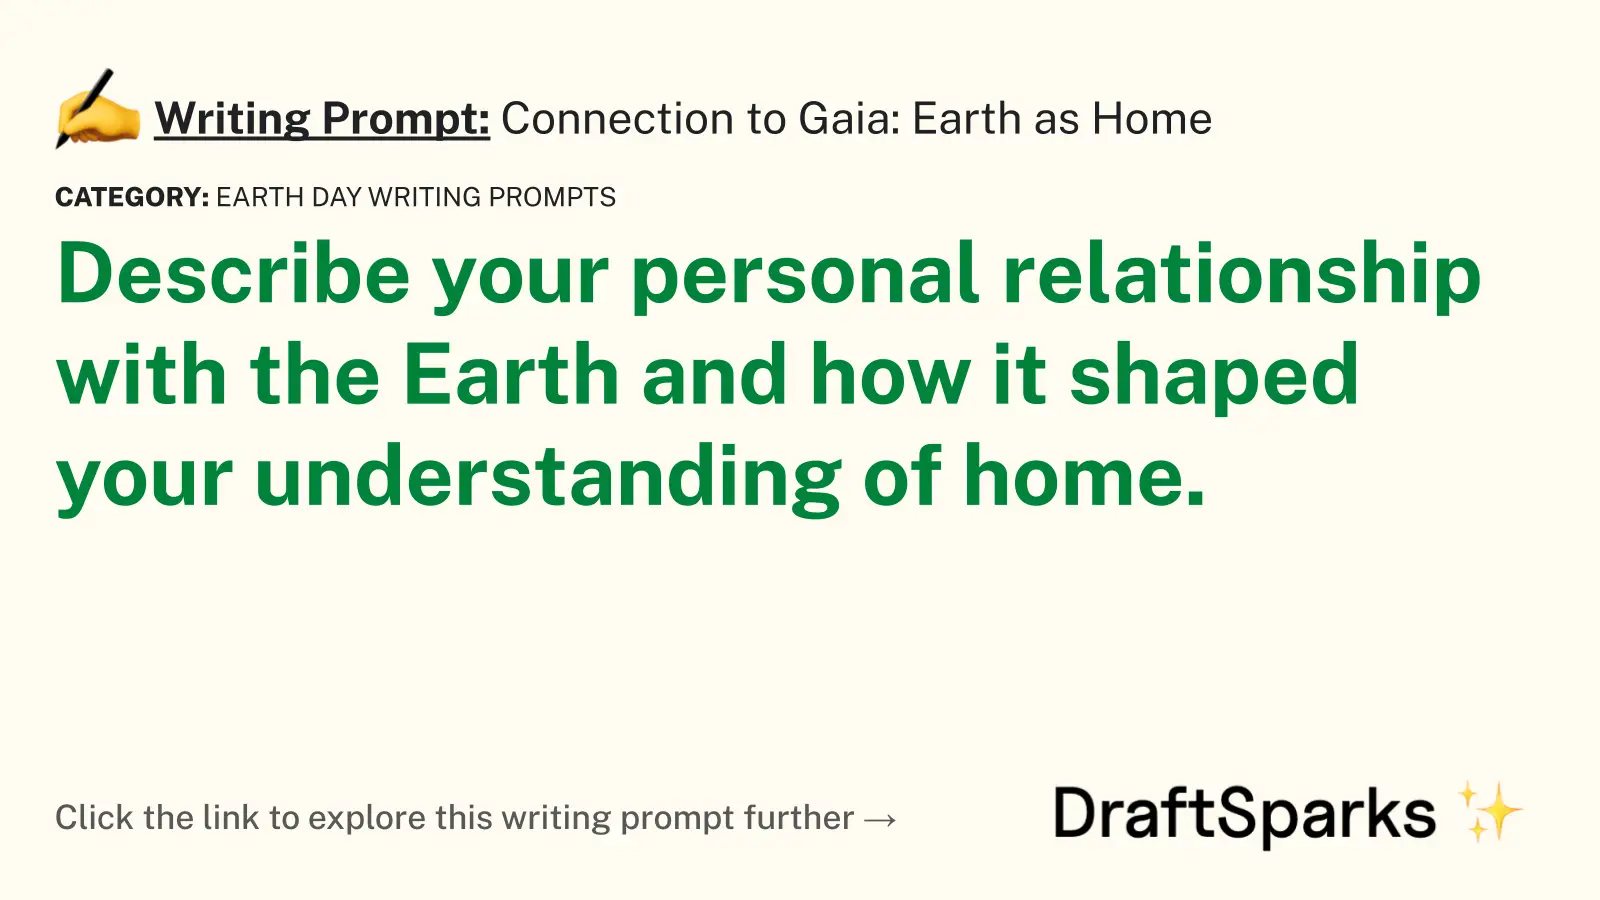 Connection to Gaia: Earth as Home